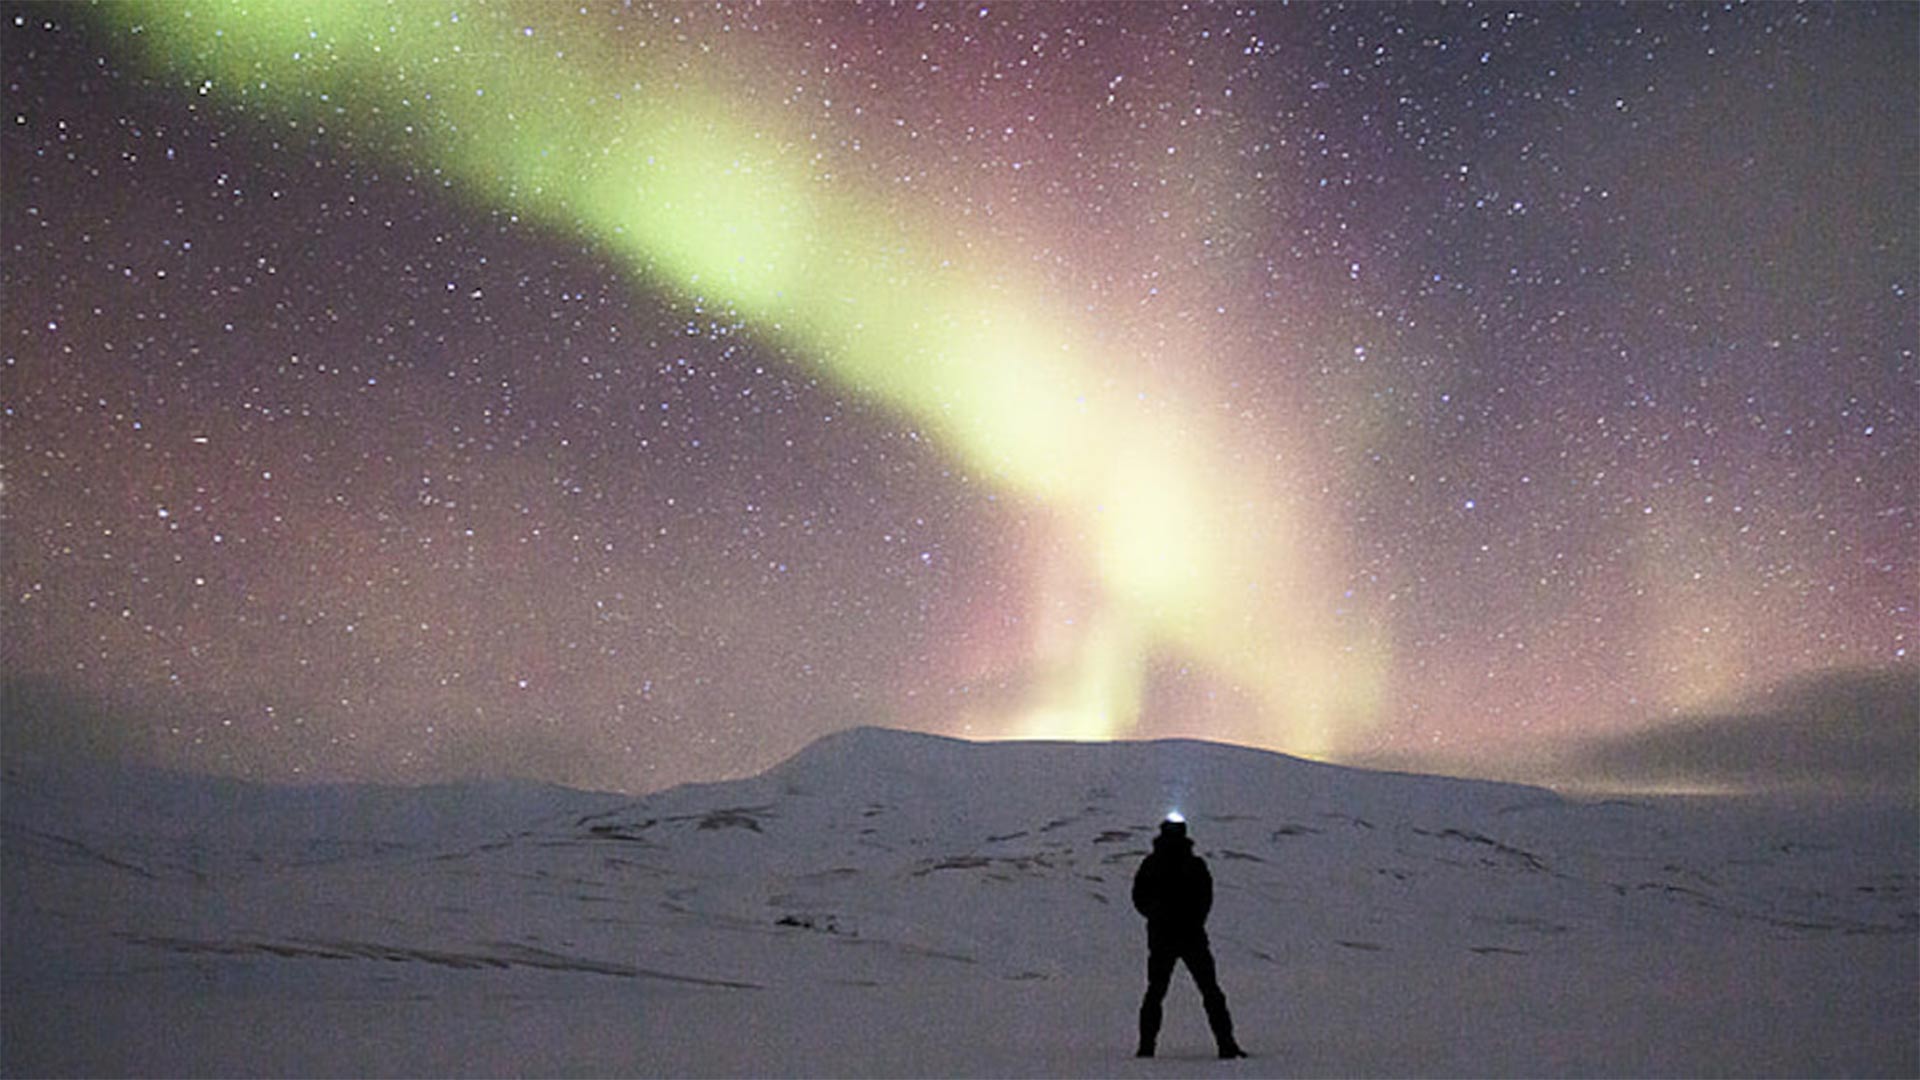 Man alone with Northern Lights